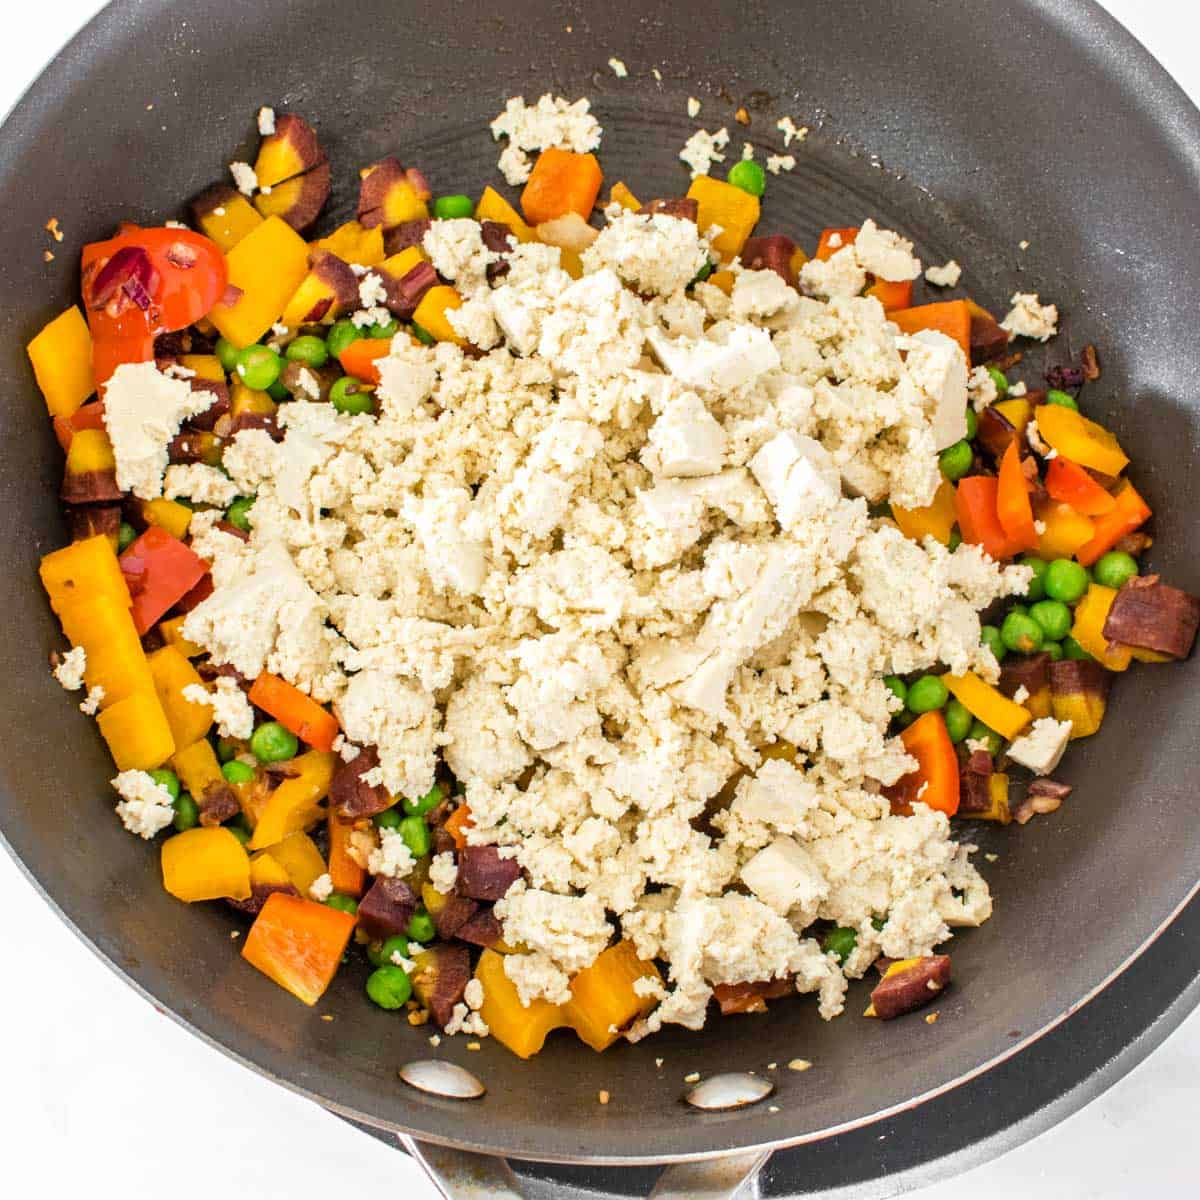 crumbled tofu tossed in with vegetables in the pan.